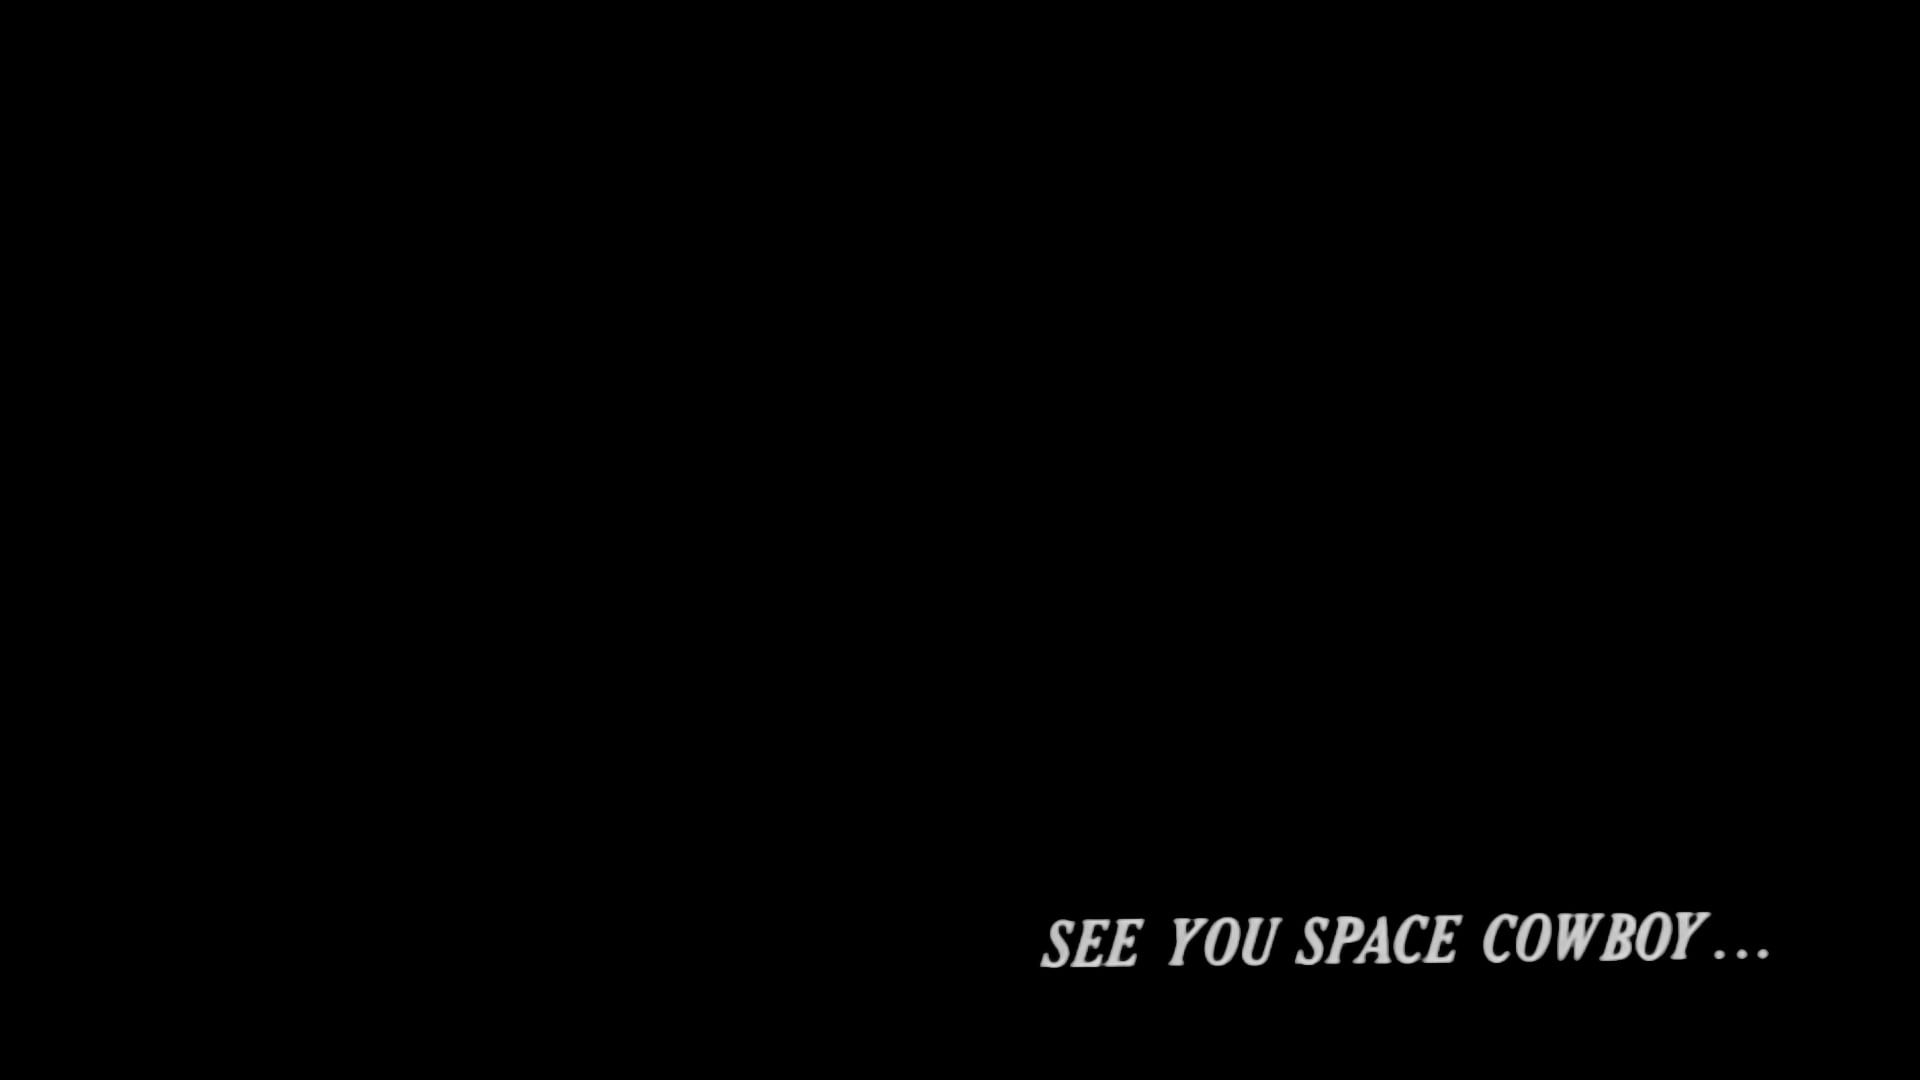 See you space cowboy text on black background, Cowboy Bebop, typography